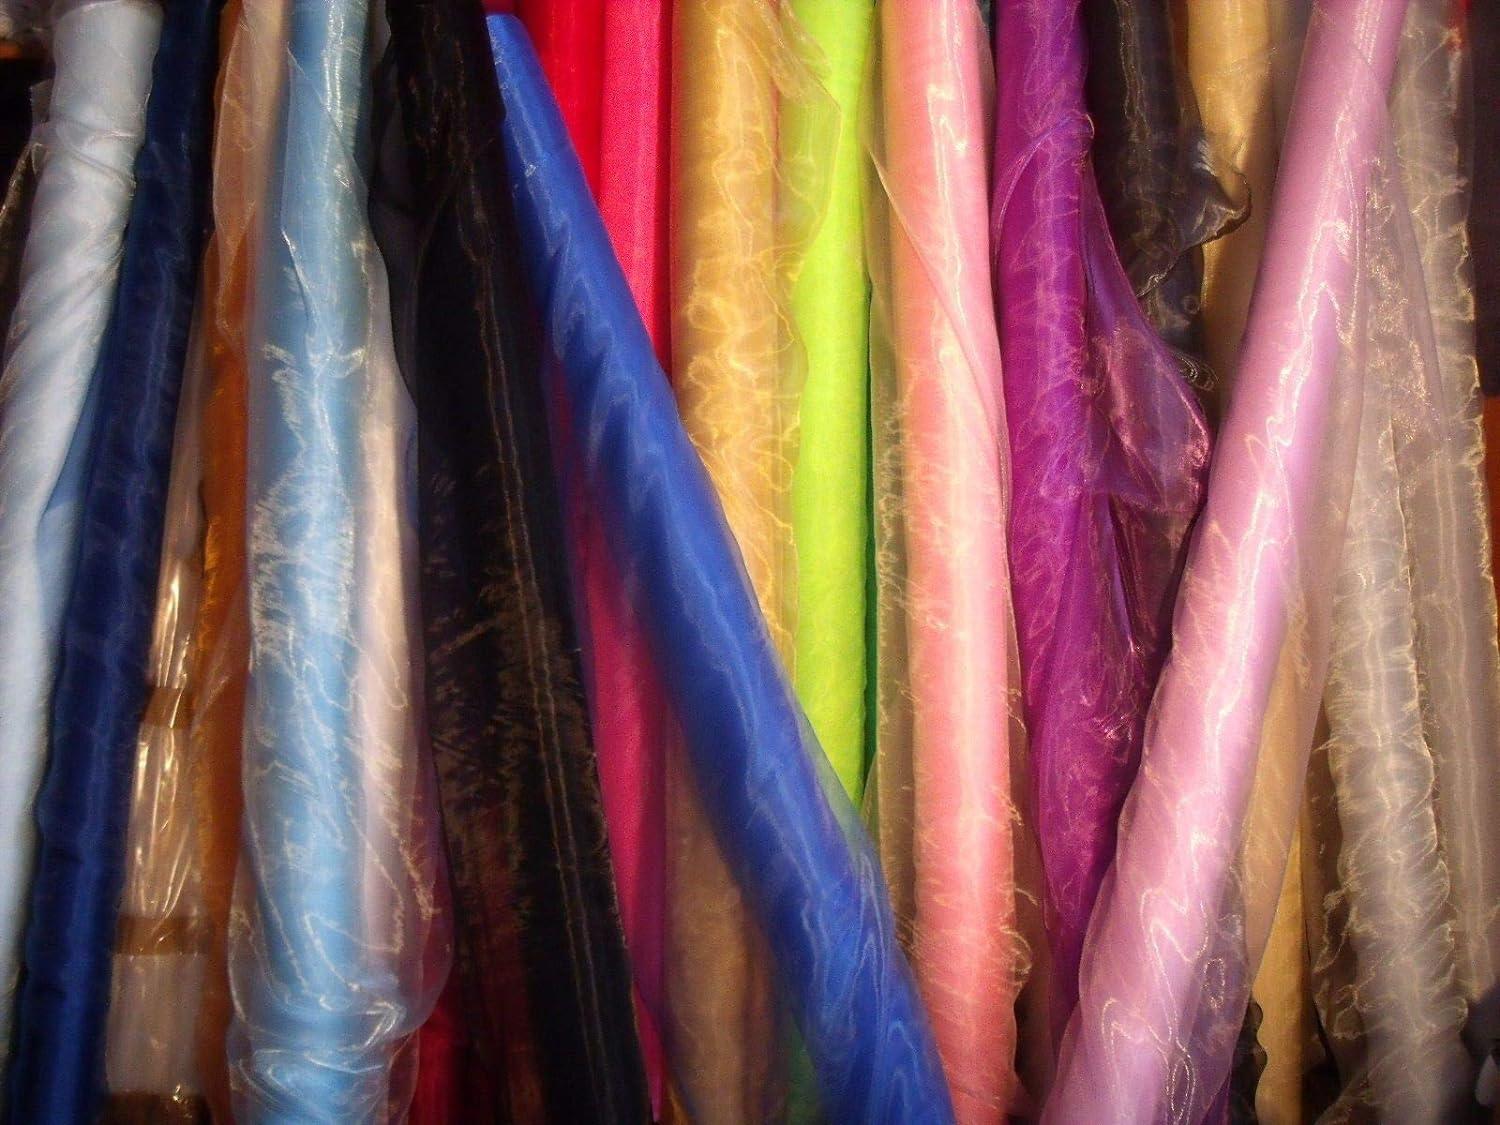 MDS Pack of 10 Yards Long Bridal Solid Sheer Organza Fabric Bolt for  Wedding Dress, Fashion, Crafts, Decorations, Backdrop, Christmas Craft  Supplies